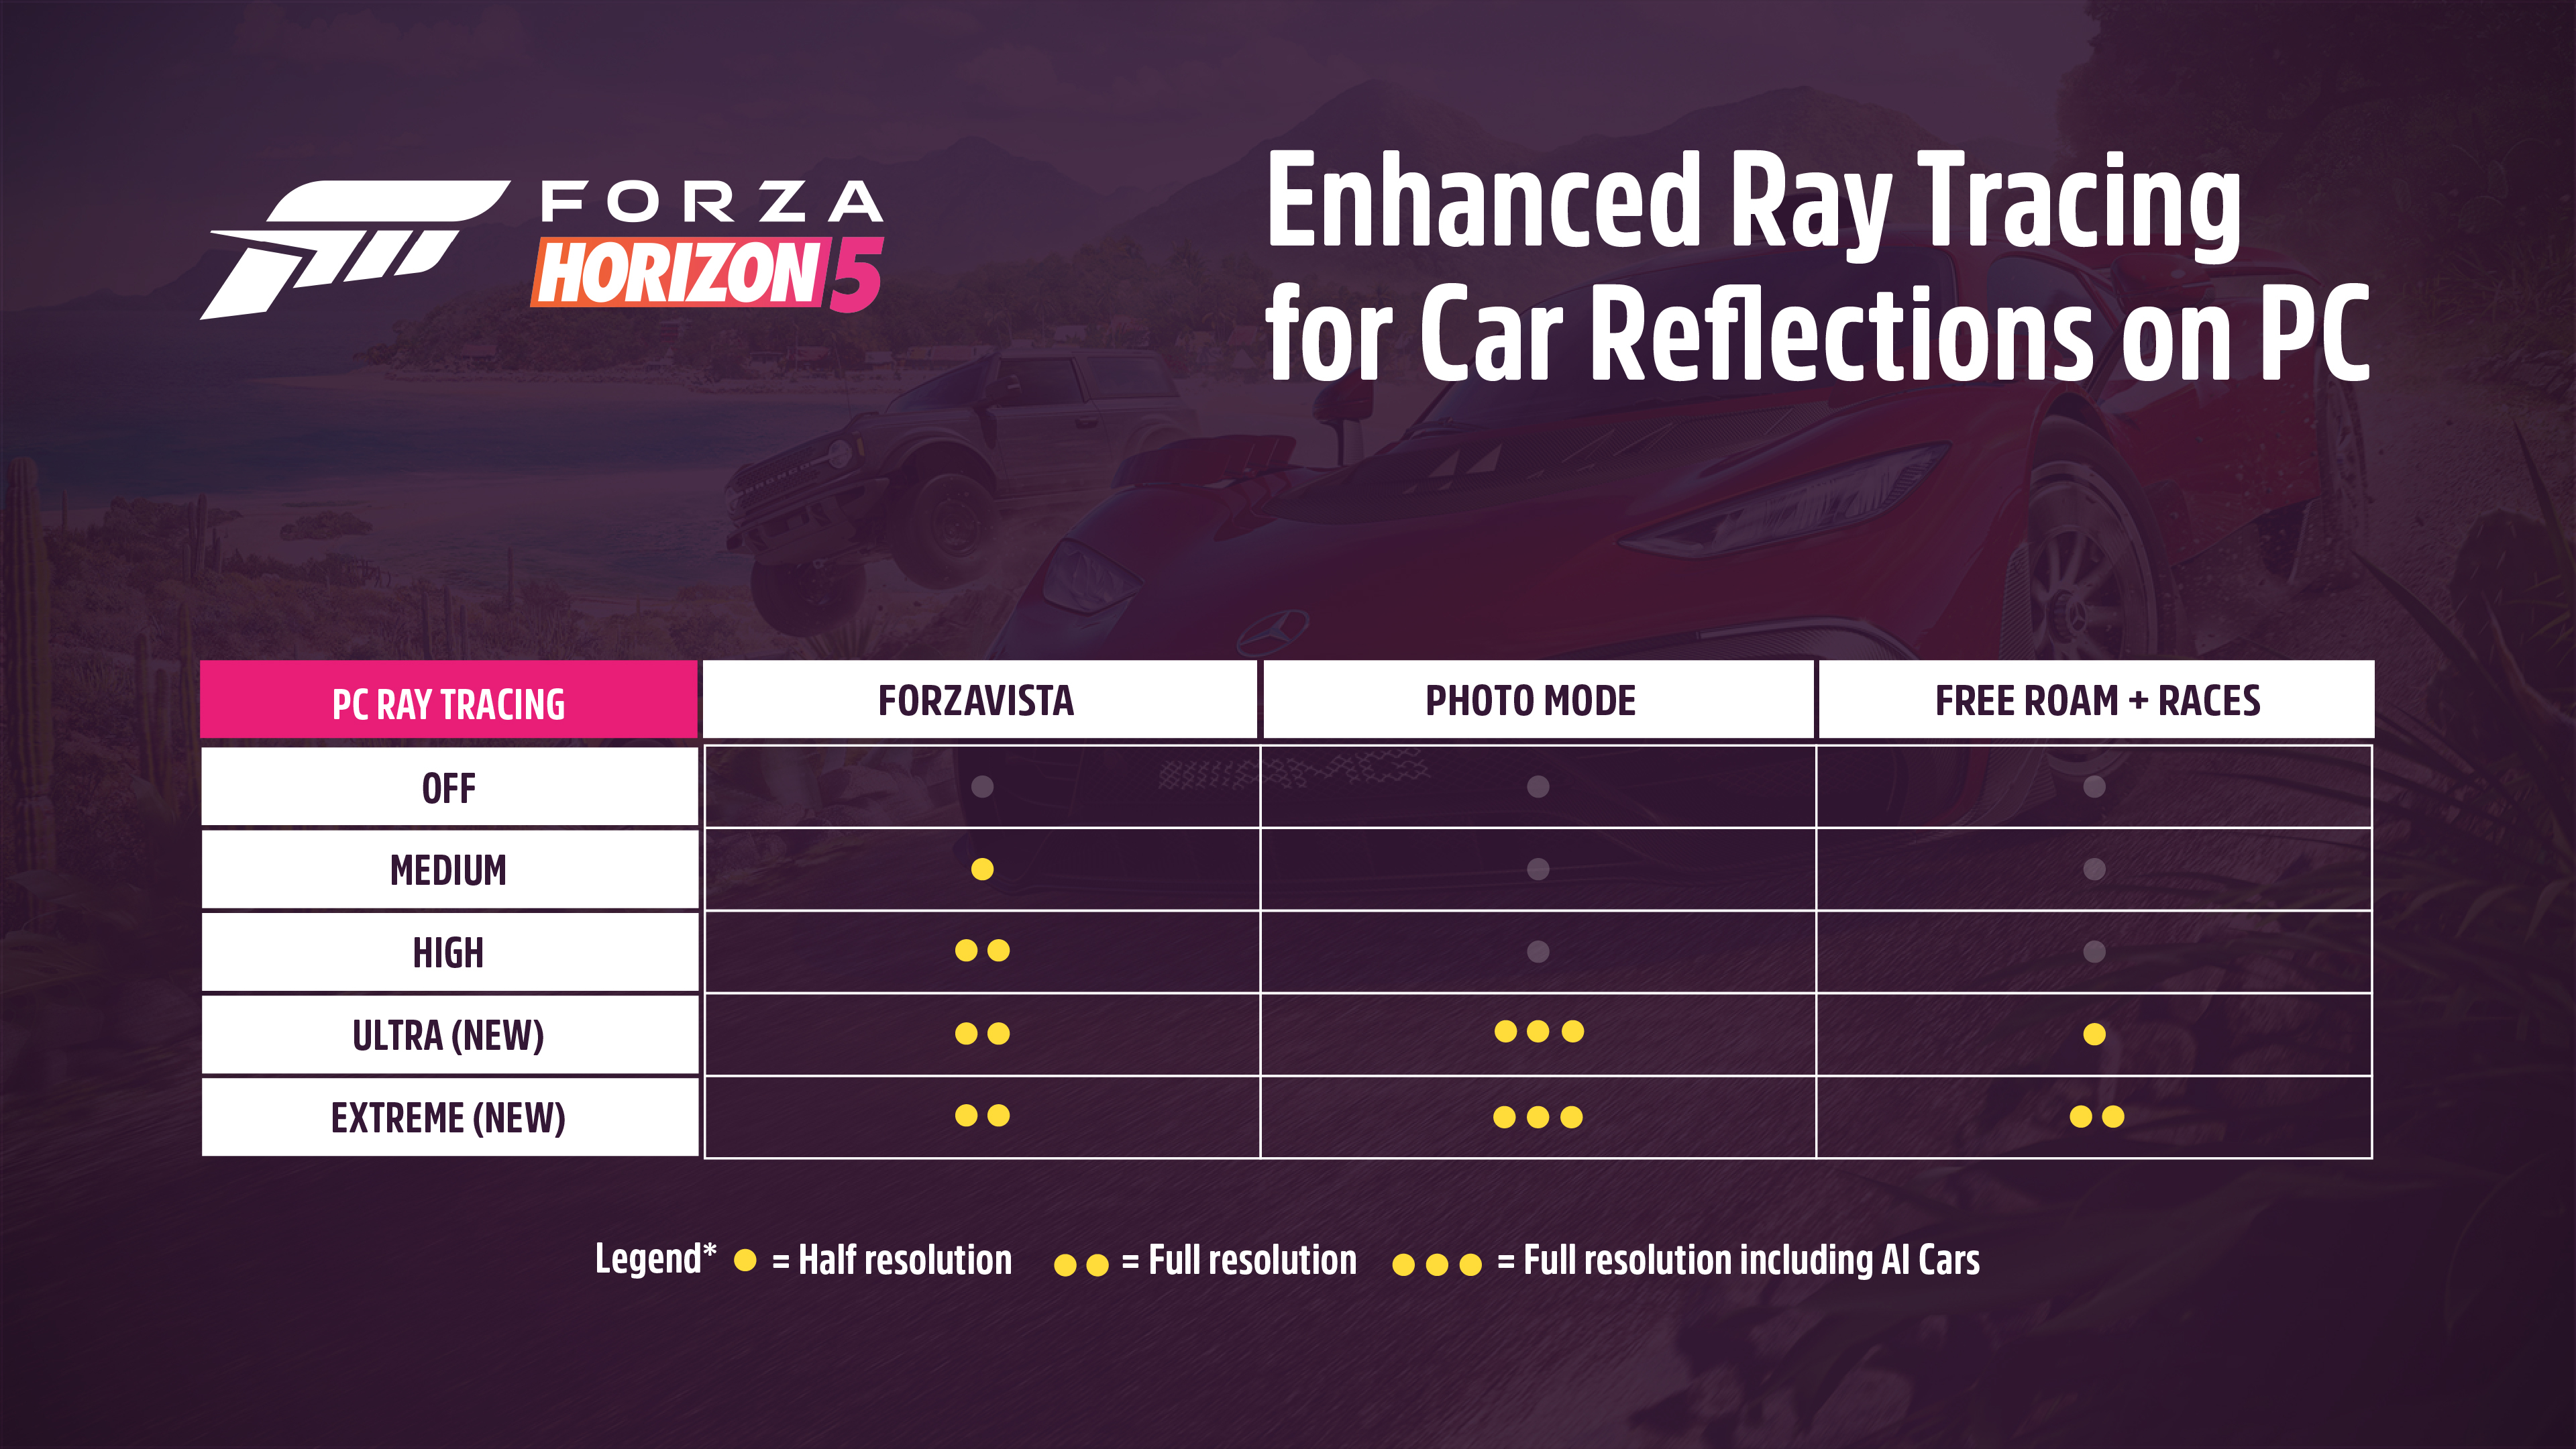 Image of Forza Horizon 5's new ray tracing modes on PC.